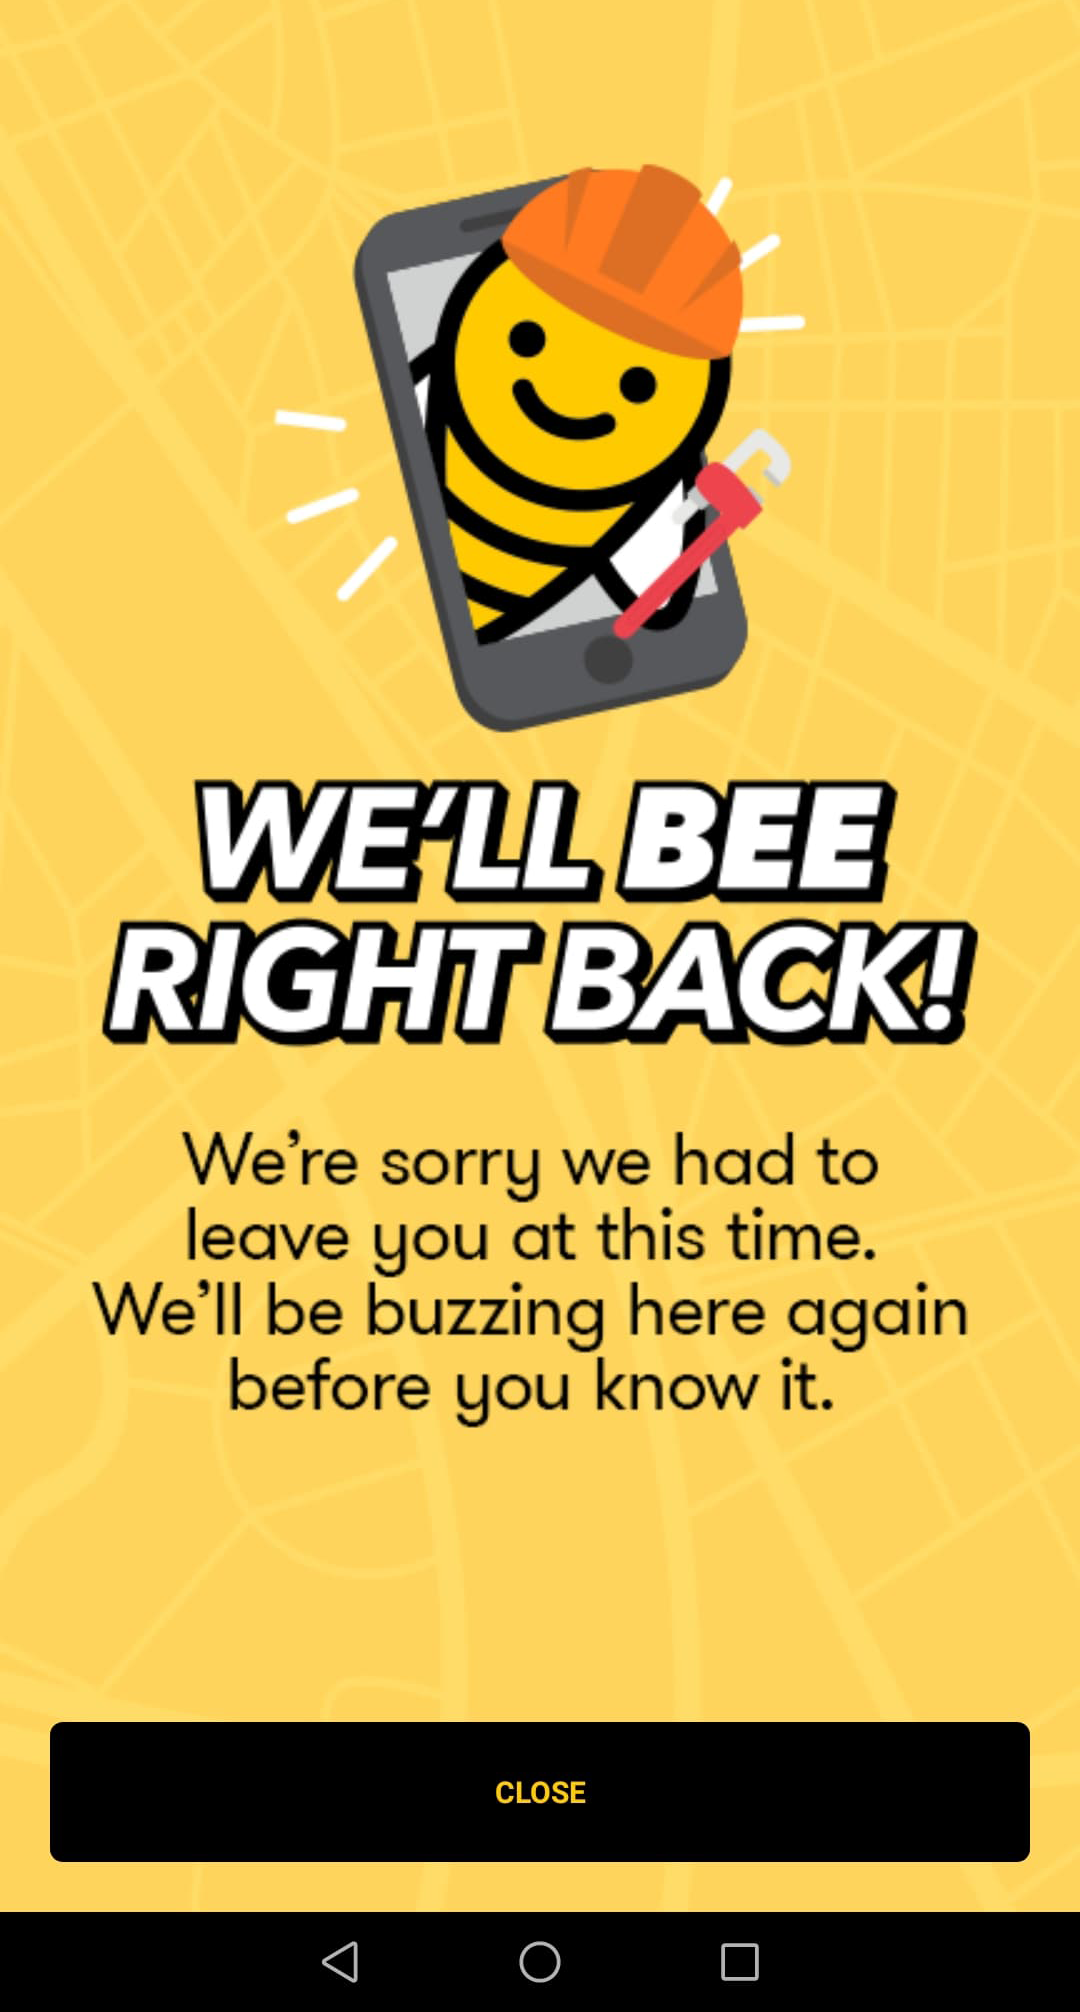 Singapore-based grocery and food delivery company Honestbee has ceased all delivery operations in the Philippines starting Apr. 20, Saturday